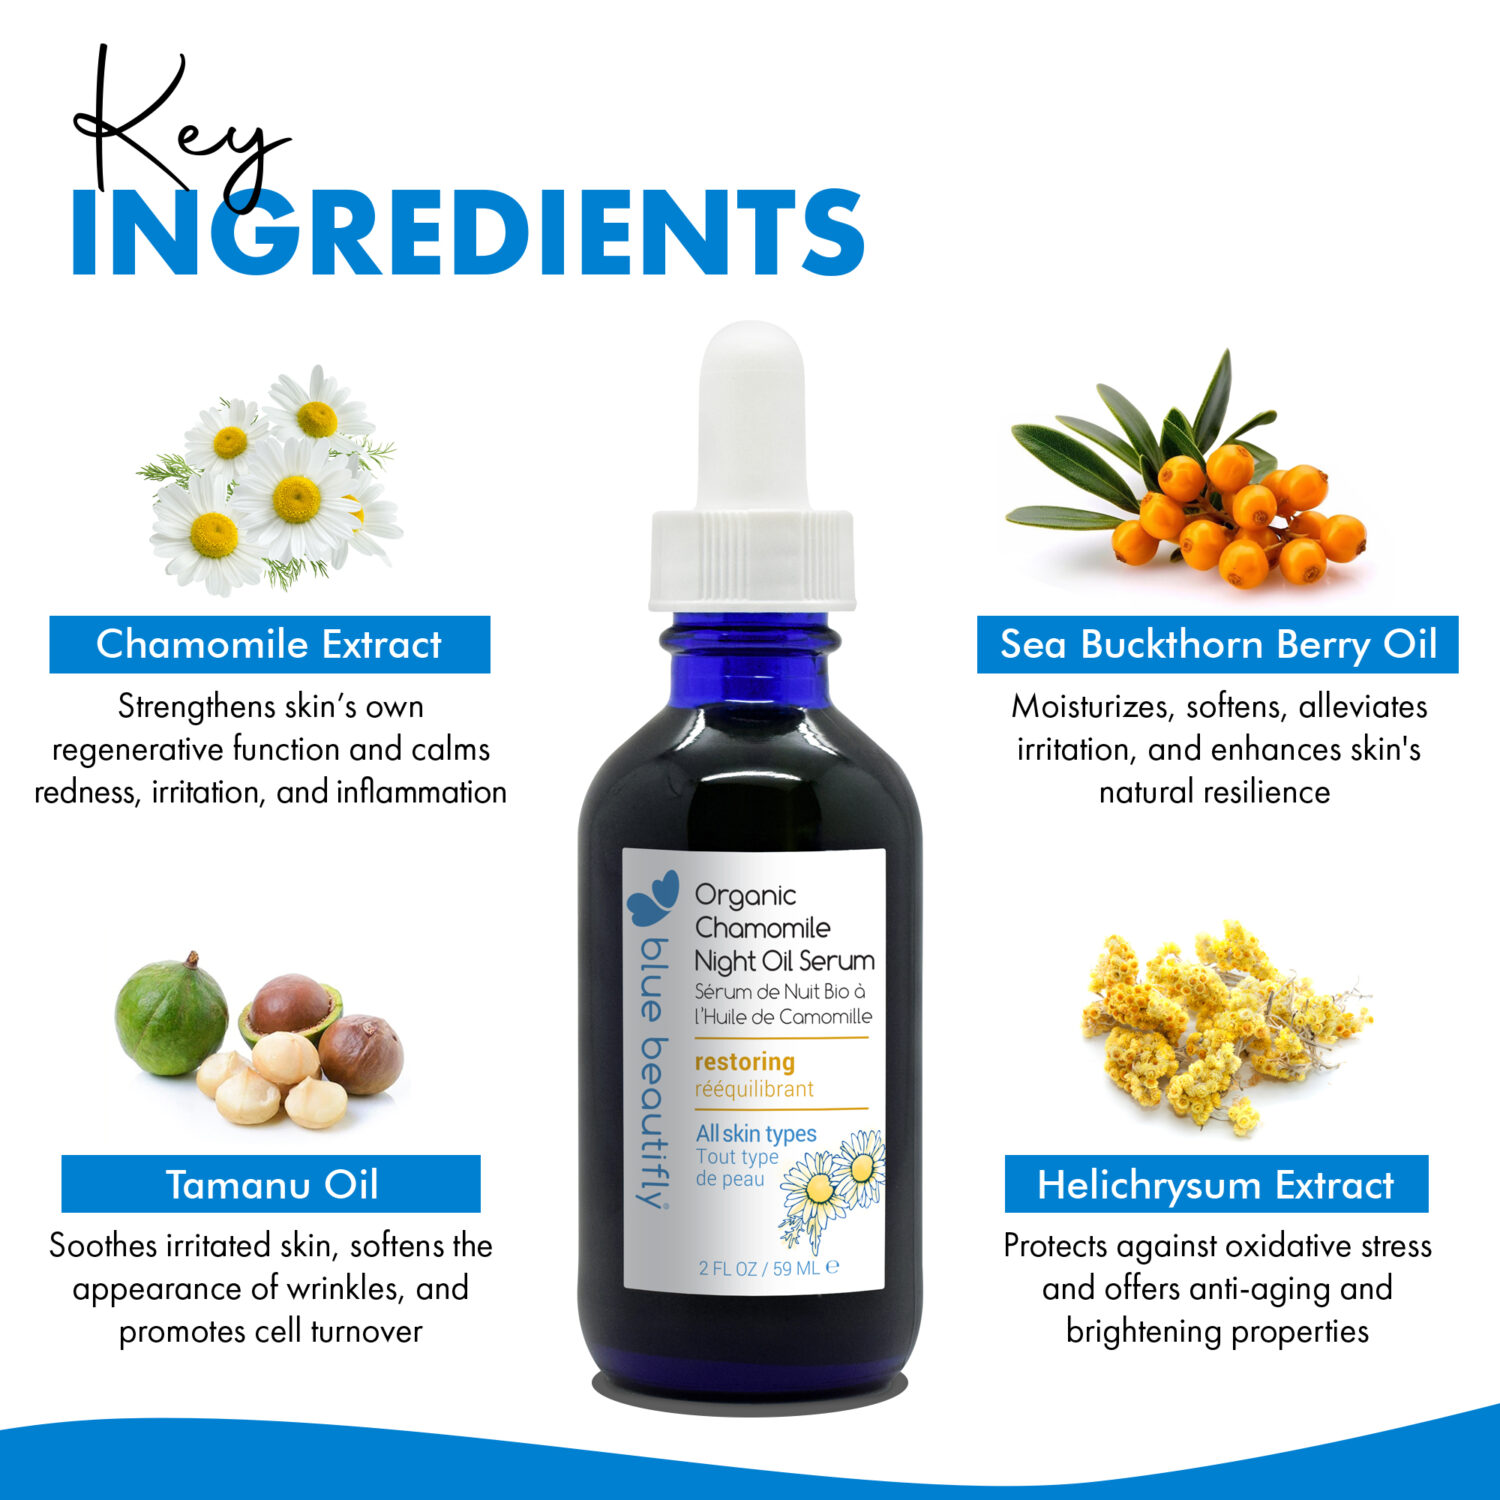 Blue Beautifly Organic Chamomile Night Oil Serum key ingredients are chamomile flowers, sea buckthorn berry oil, tamanu oil, and helichrysum extract